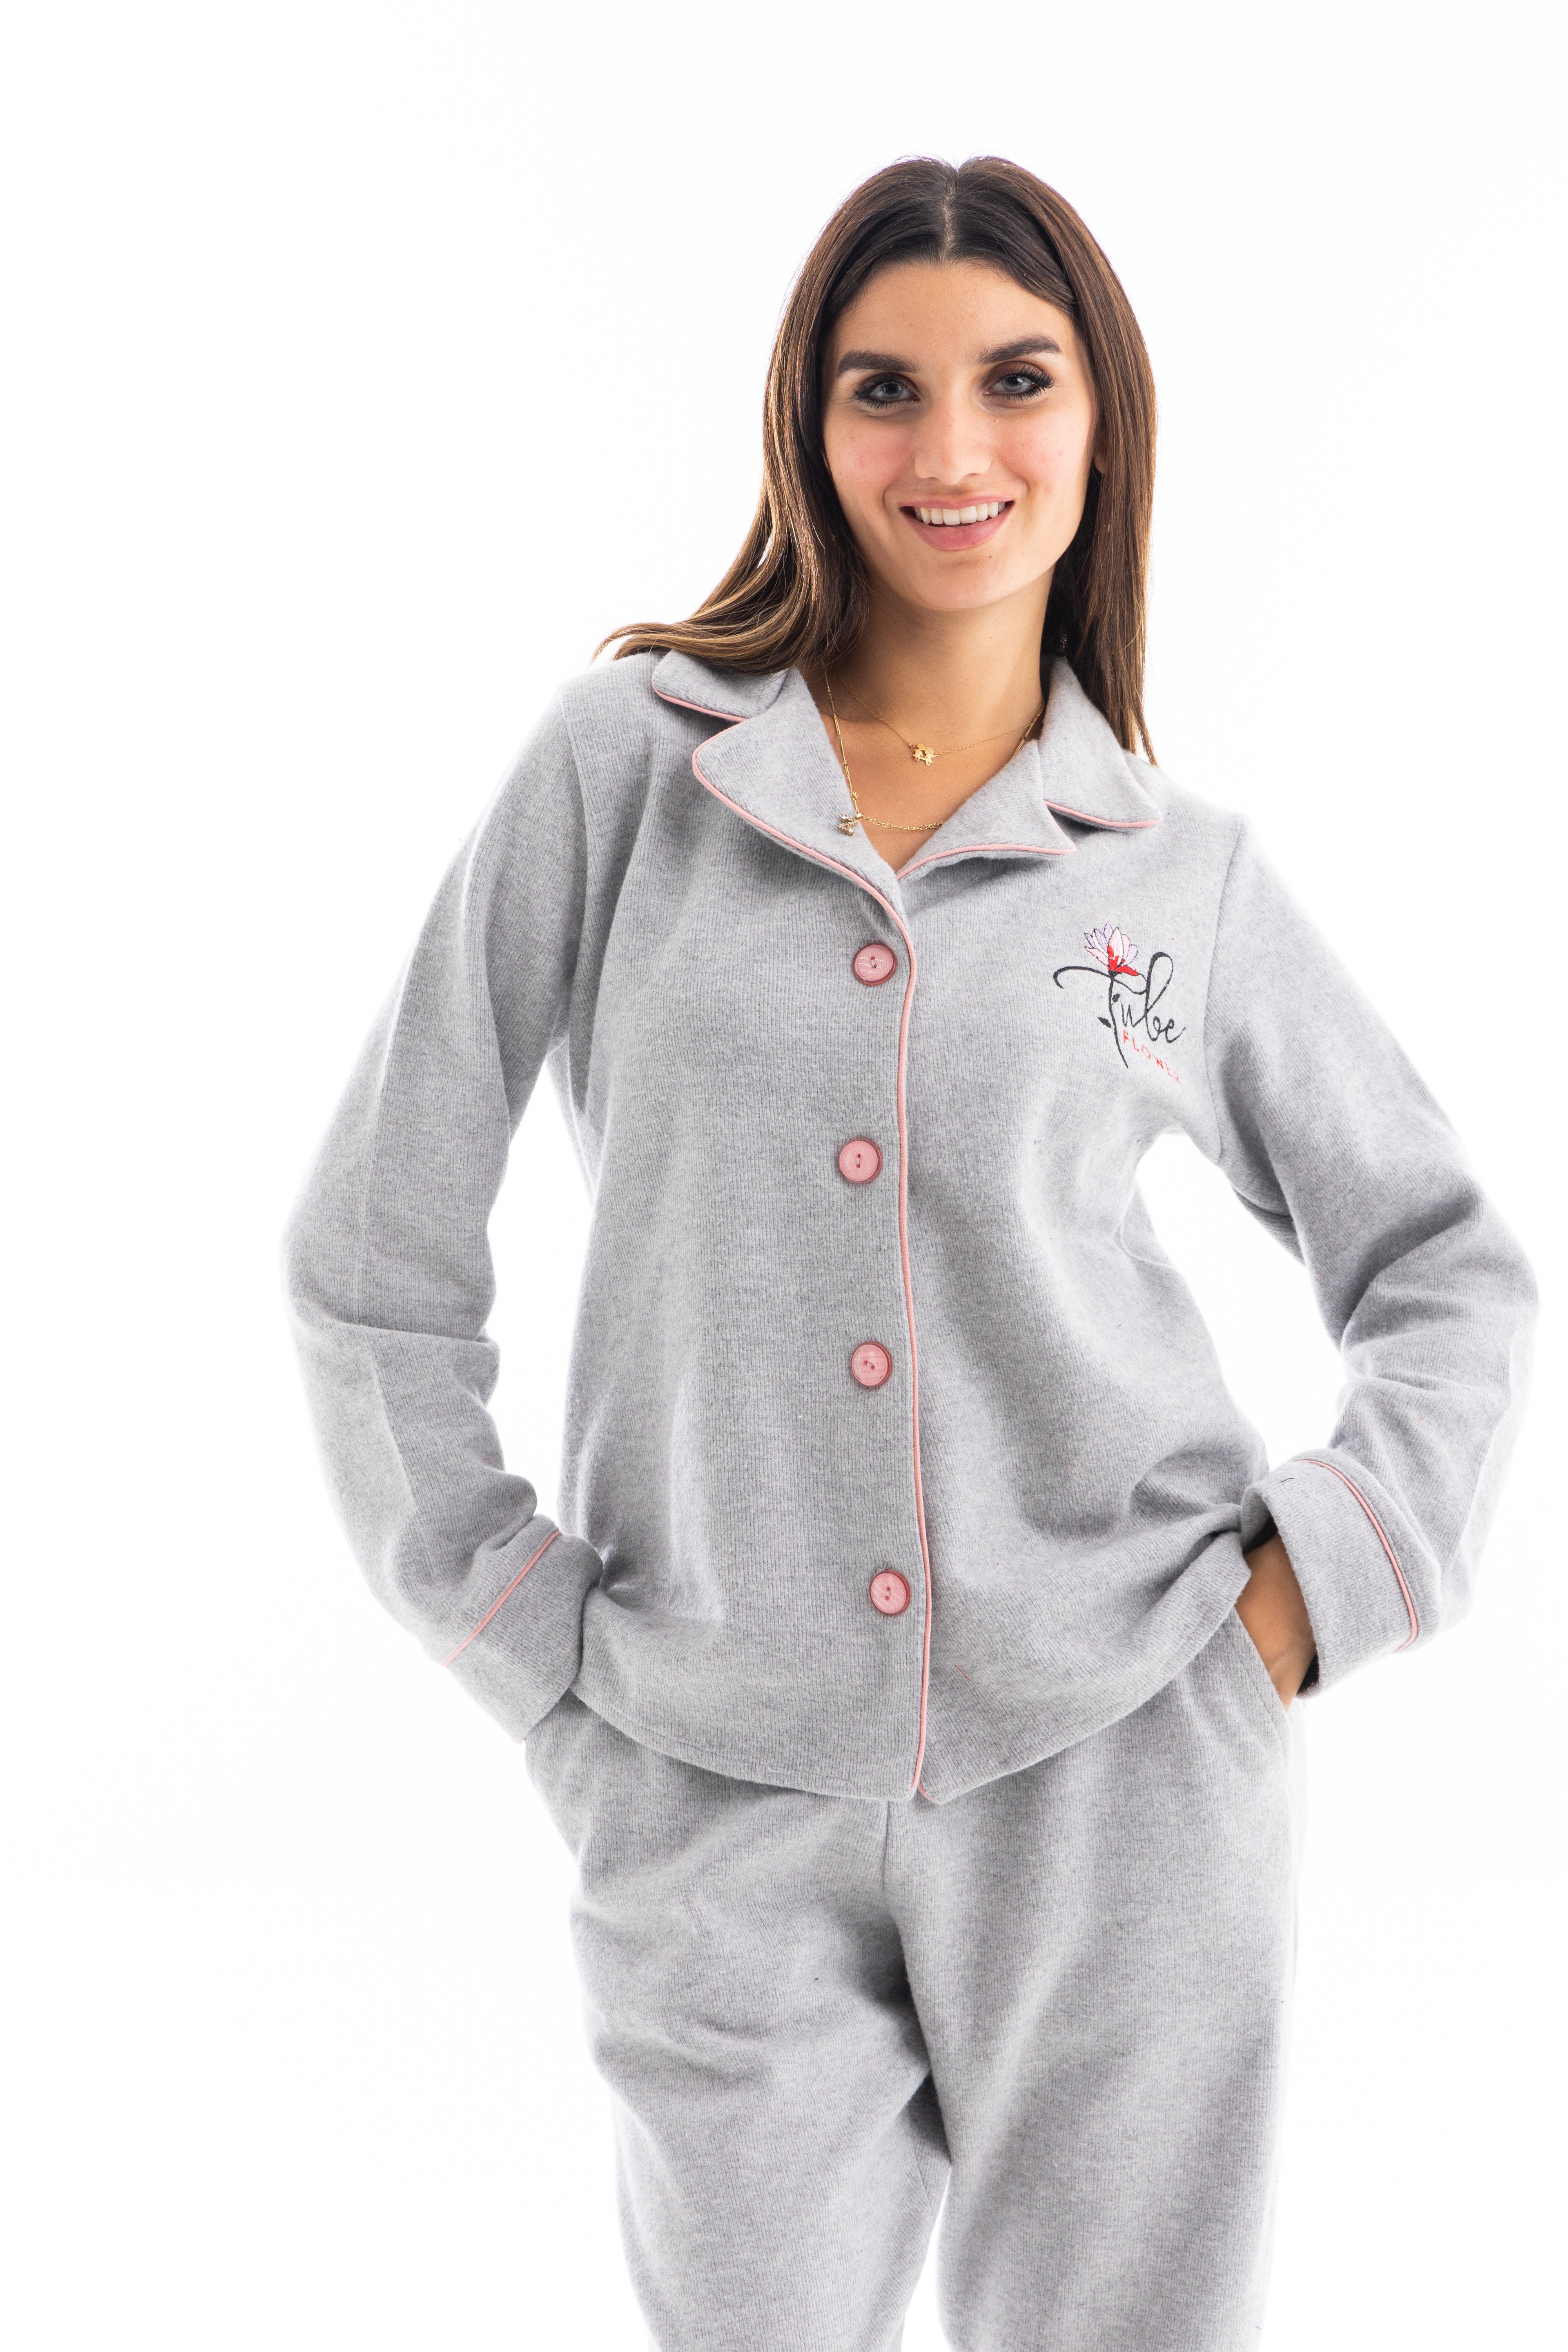 Classic women's pajama from Red Cotton - Chanette